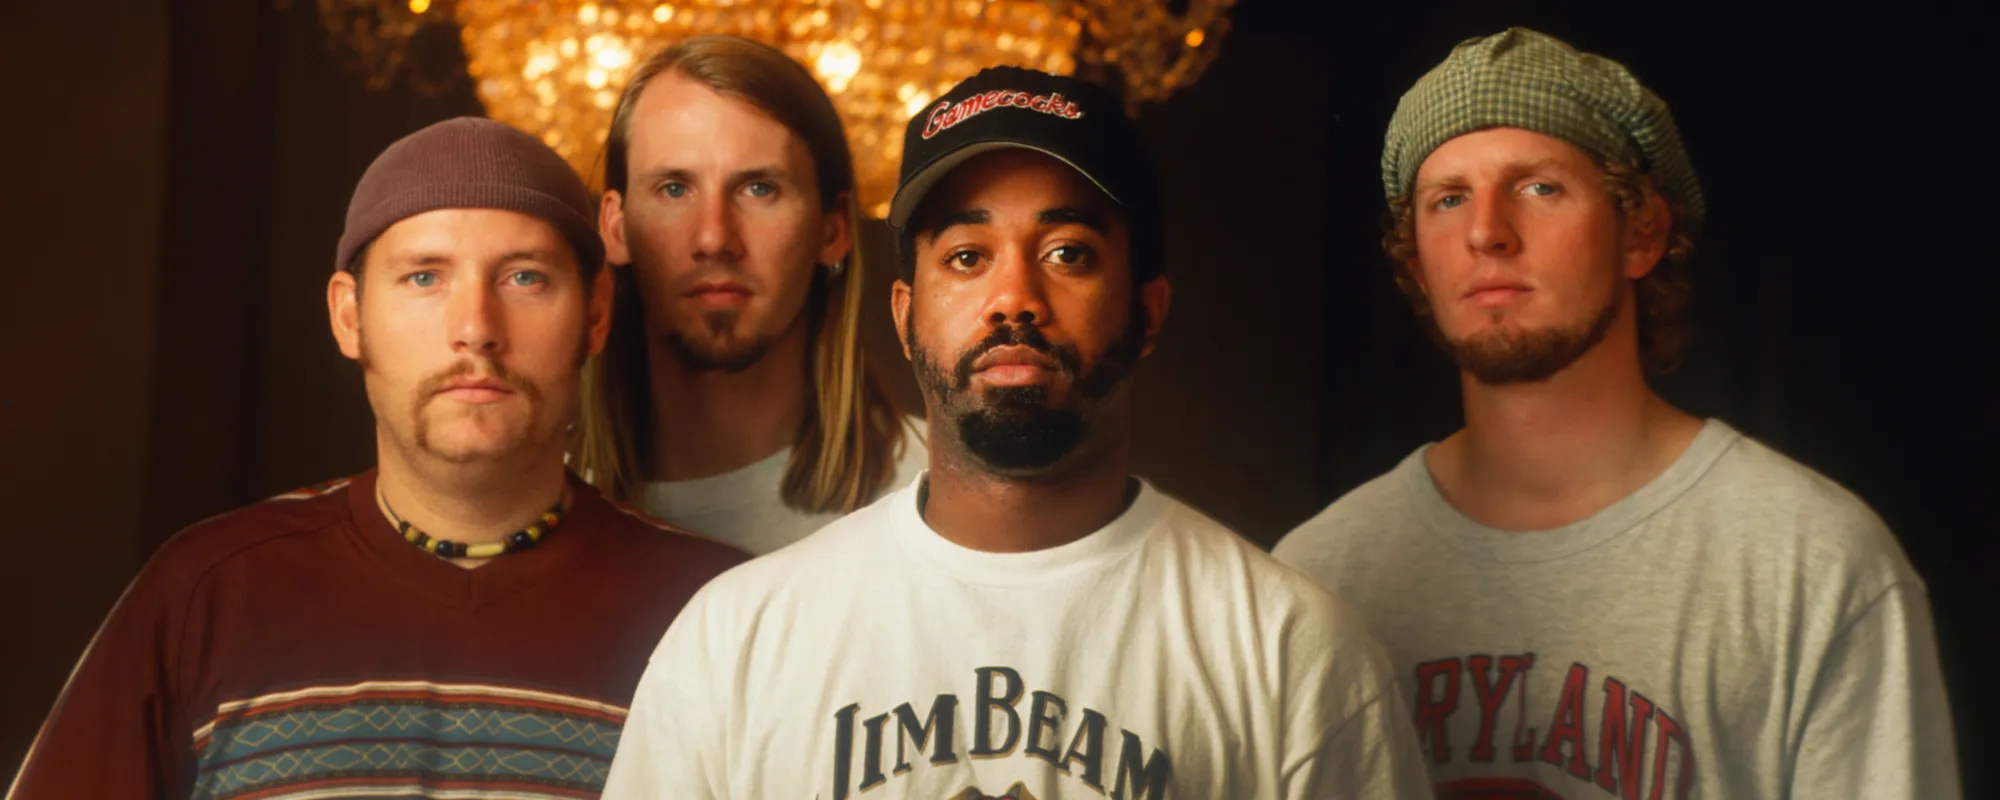 Behind the Band Name: Hootie & the Blowfish